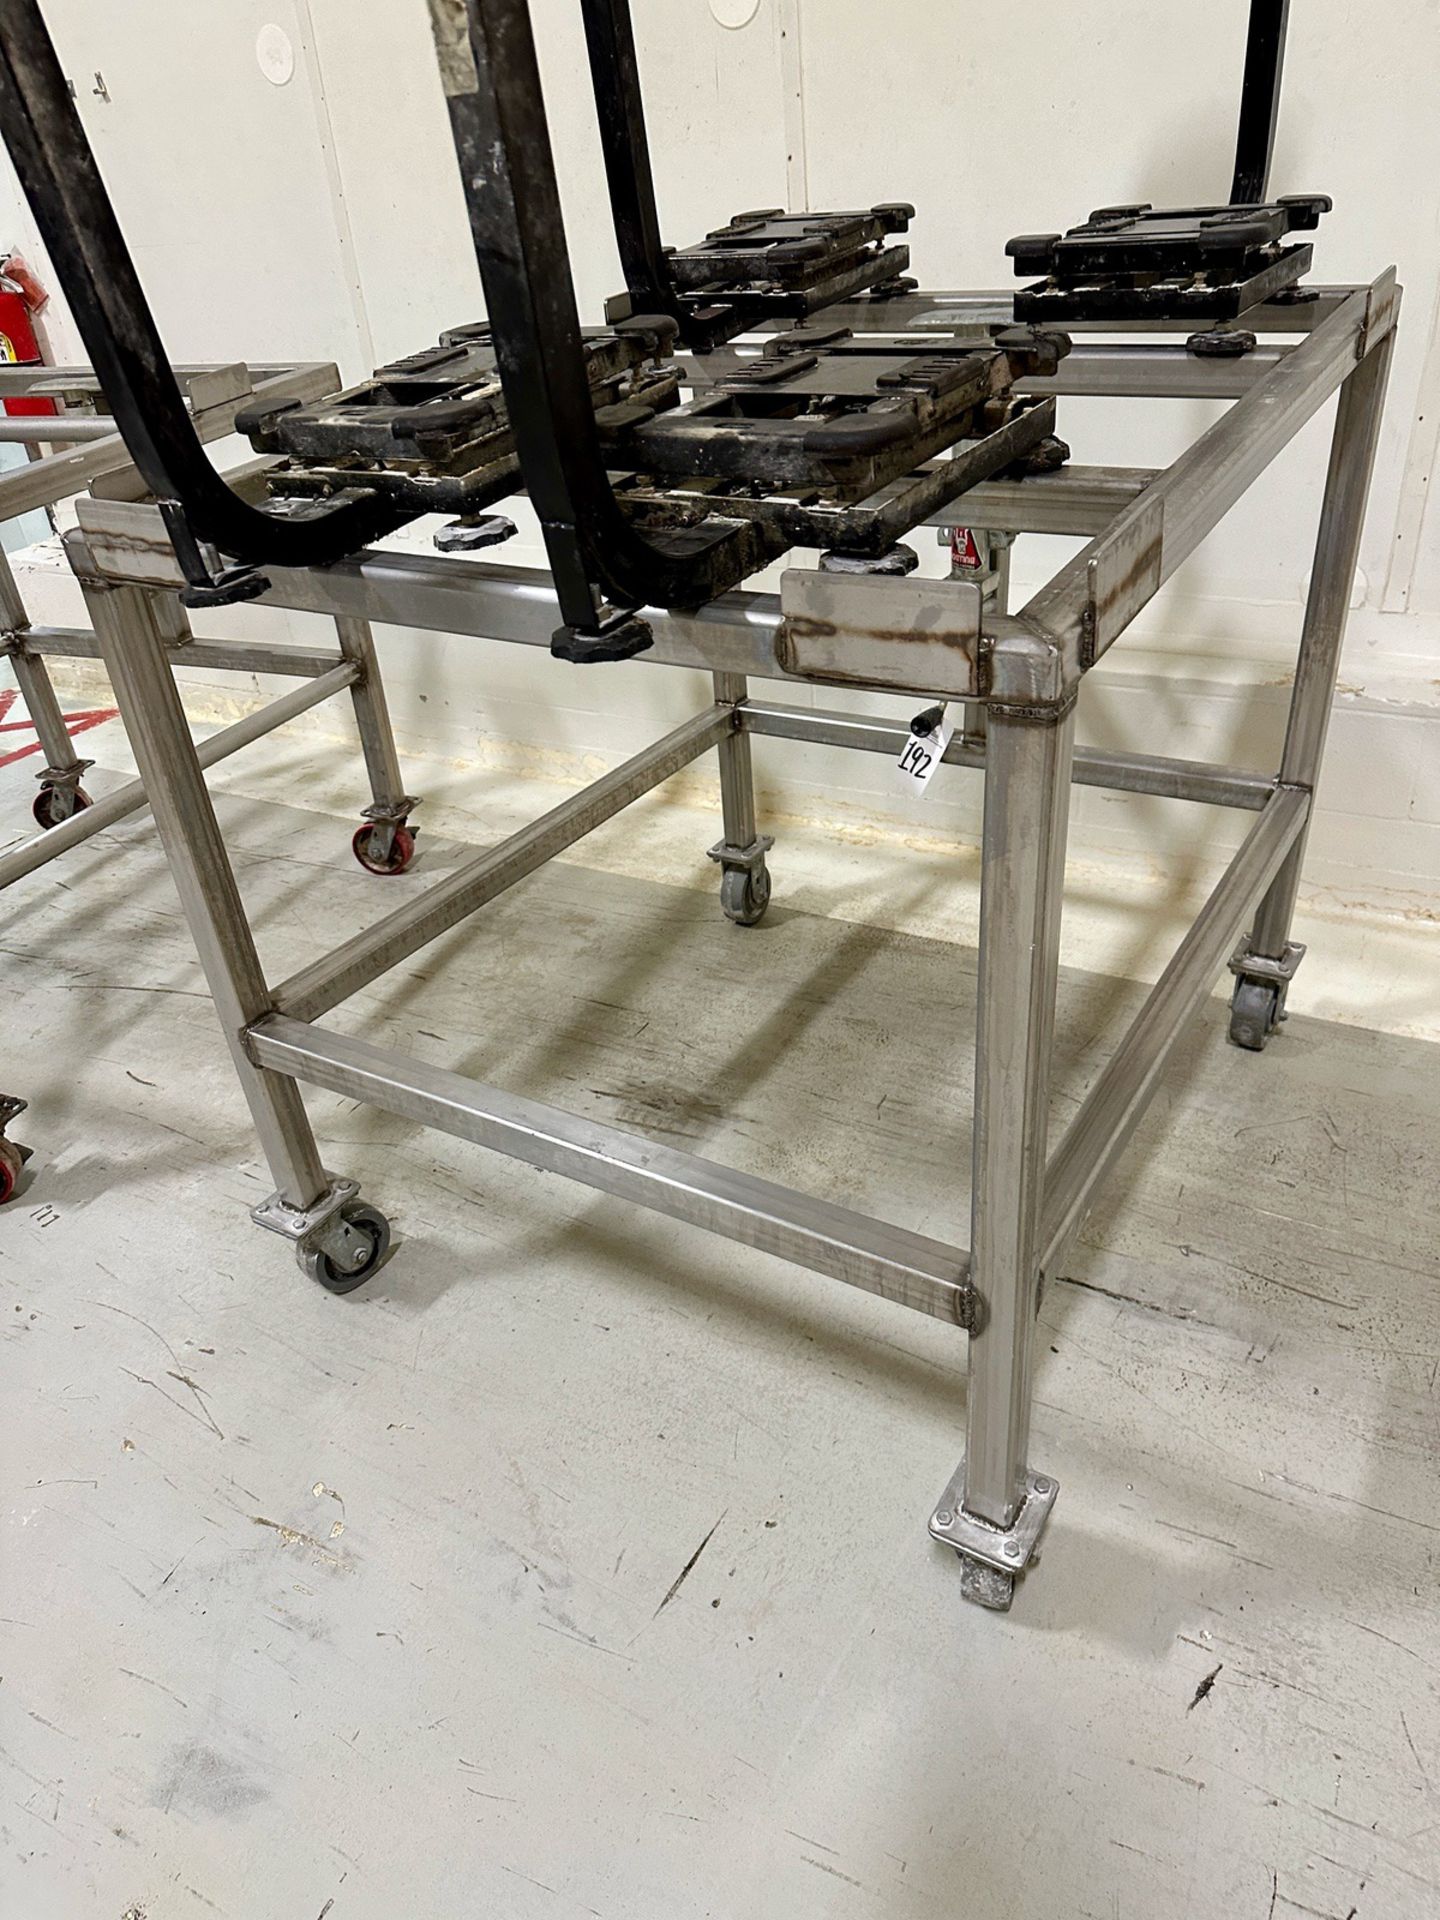 Stainless Steel Tote Stand with Hand Powered Tilting Jack | Rig Fee $25 - Image 2 of 3